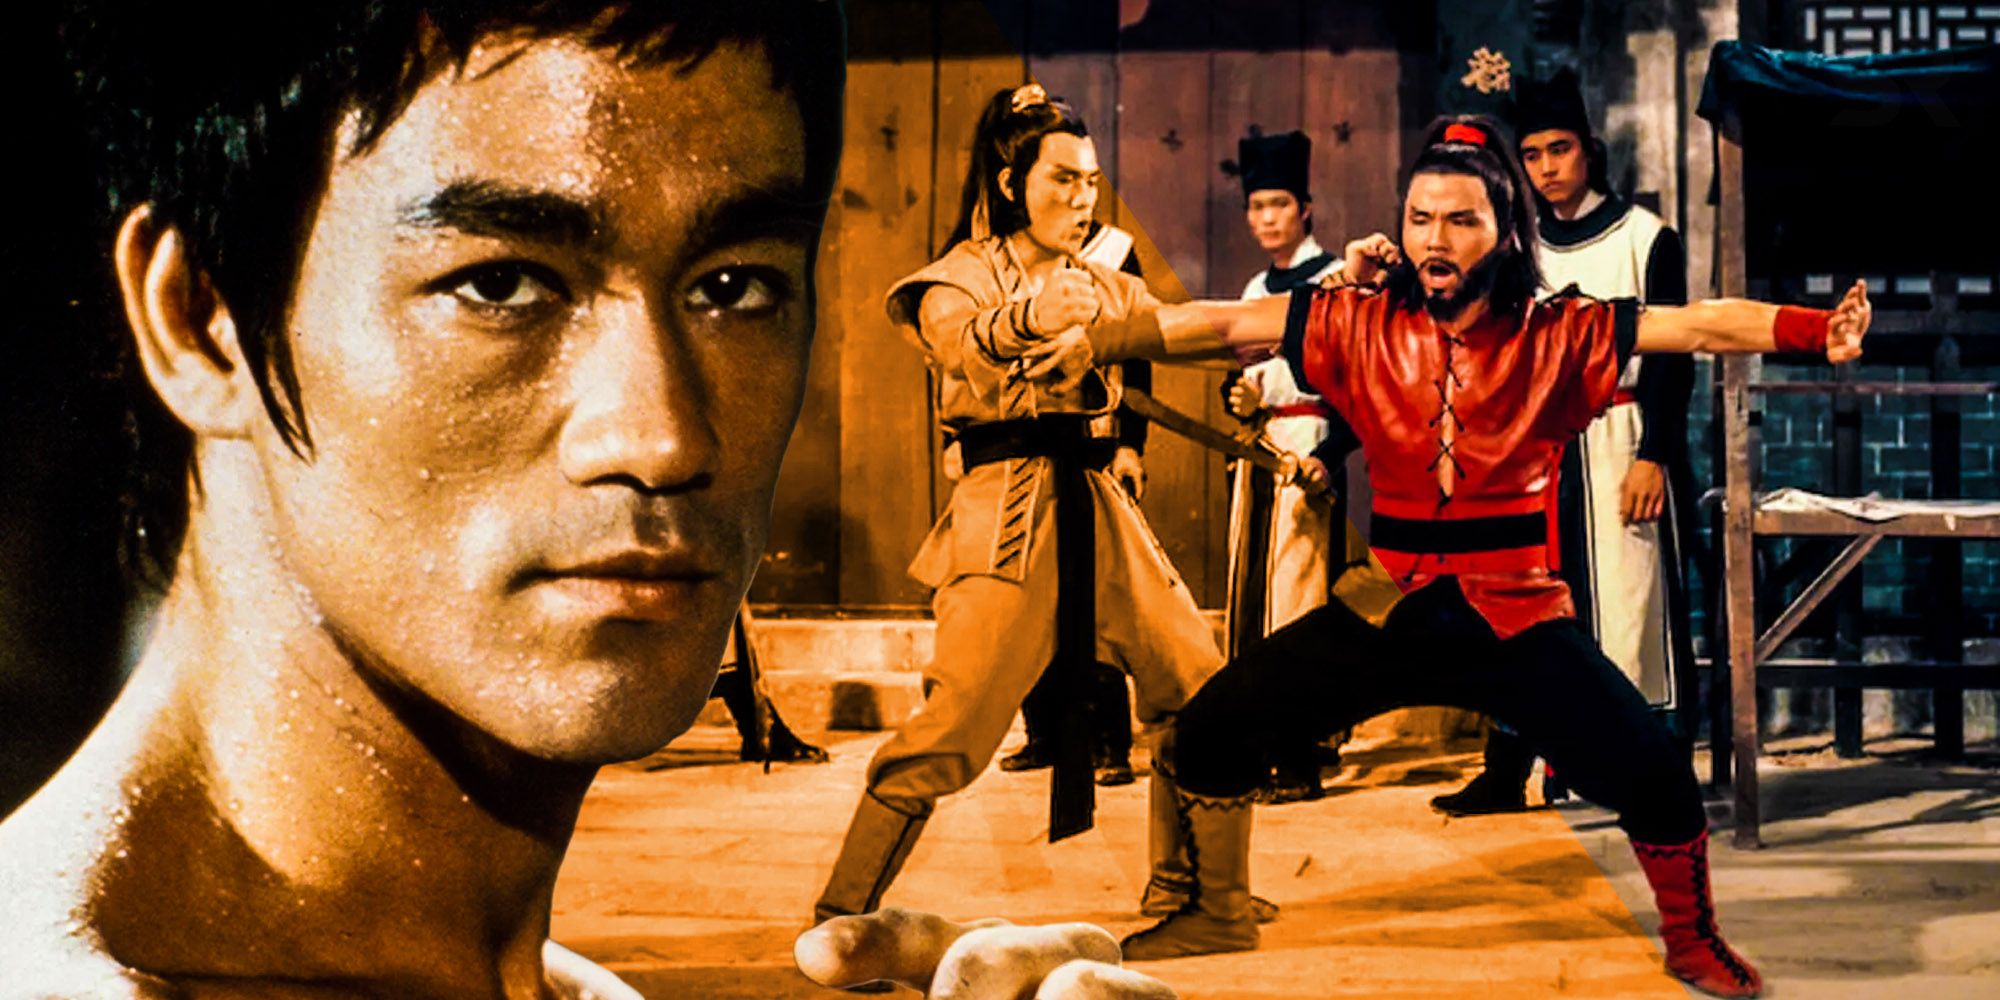 bruce lee did not like kung fu movies